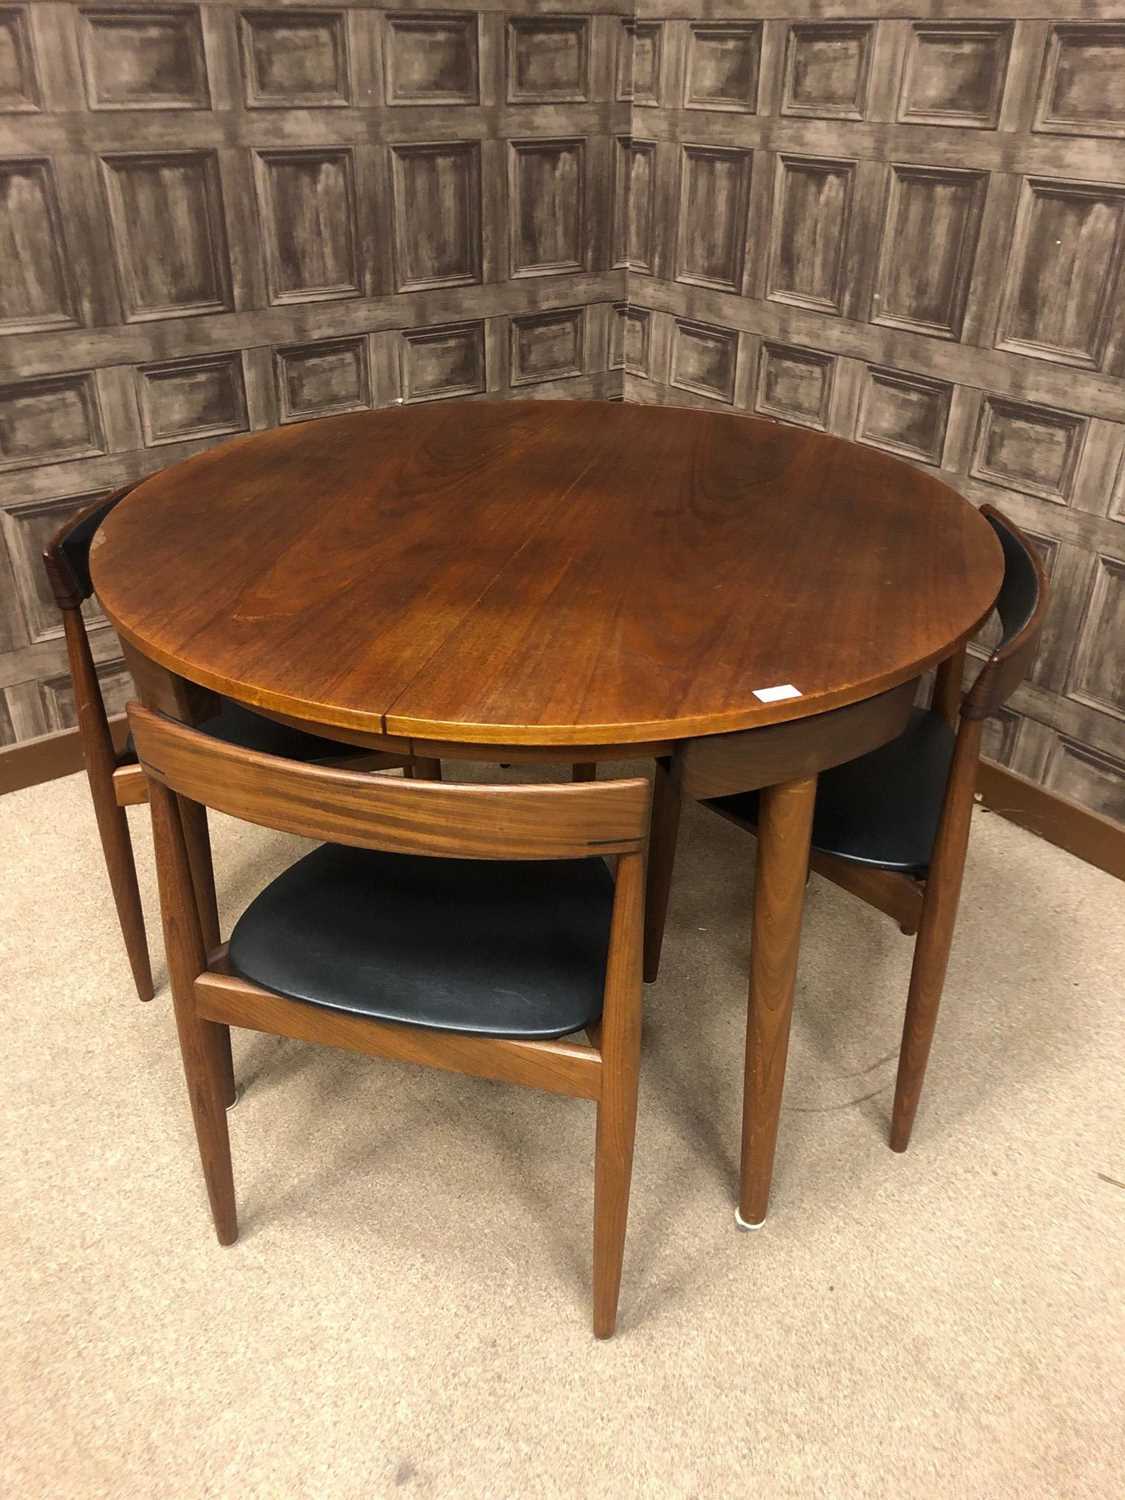 Lot 1424 - A DANISH TEAK DINING TABLE AND FOUR CHAIRS BY HANS OLSEN